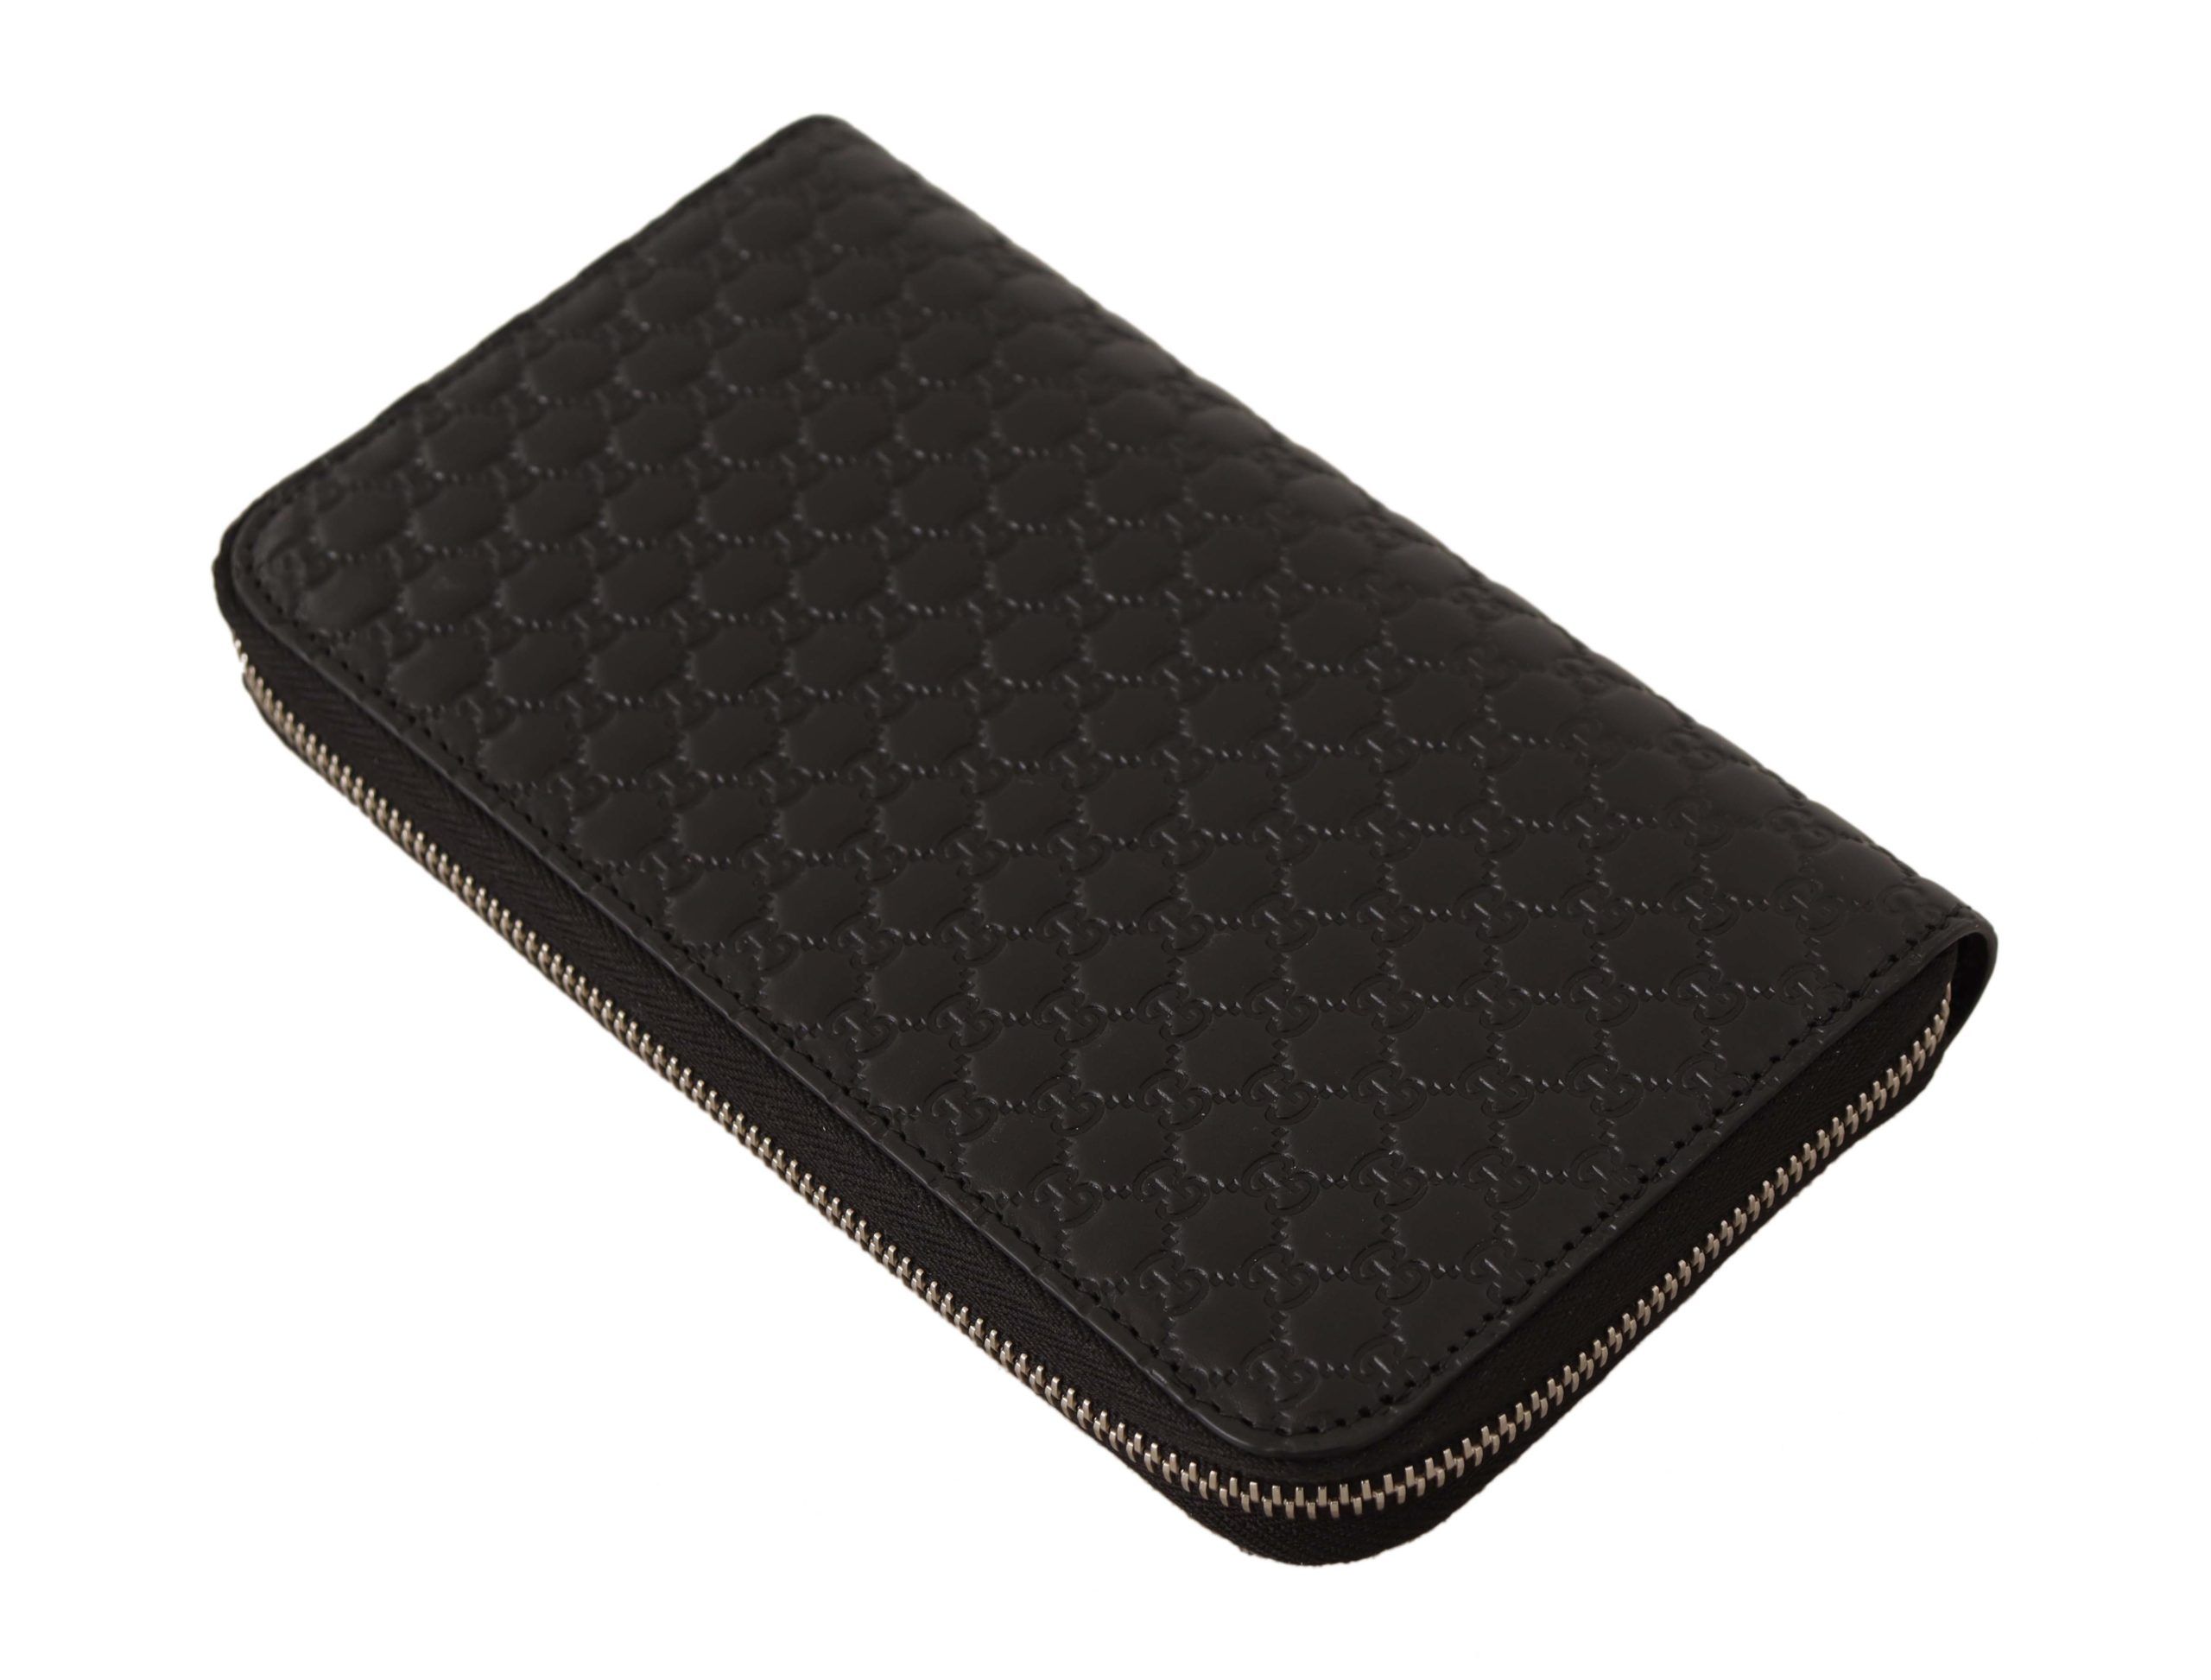 Microguccissima Leather Zipper Wallet